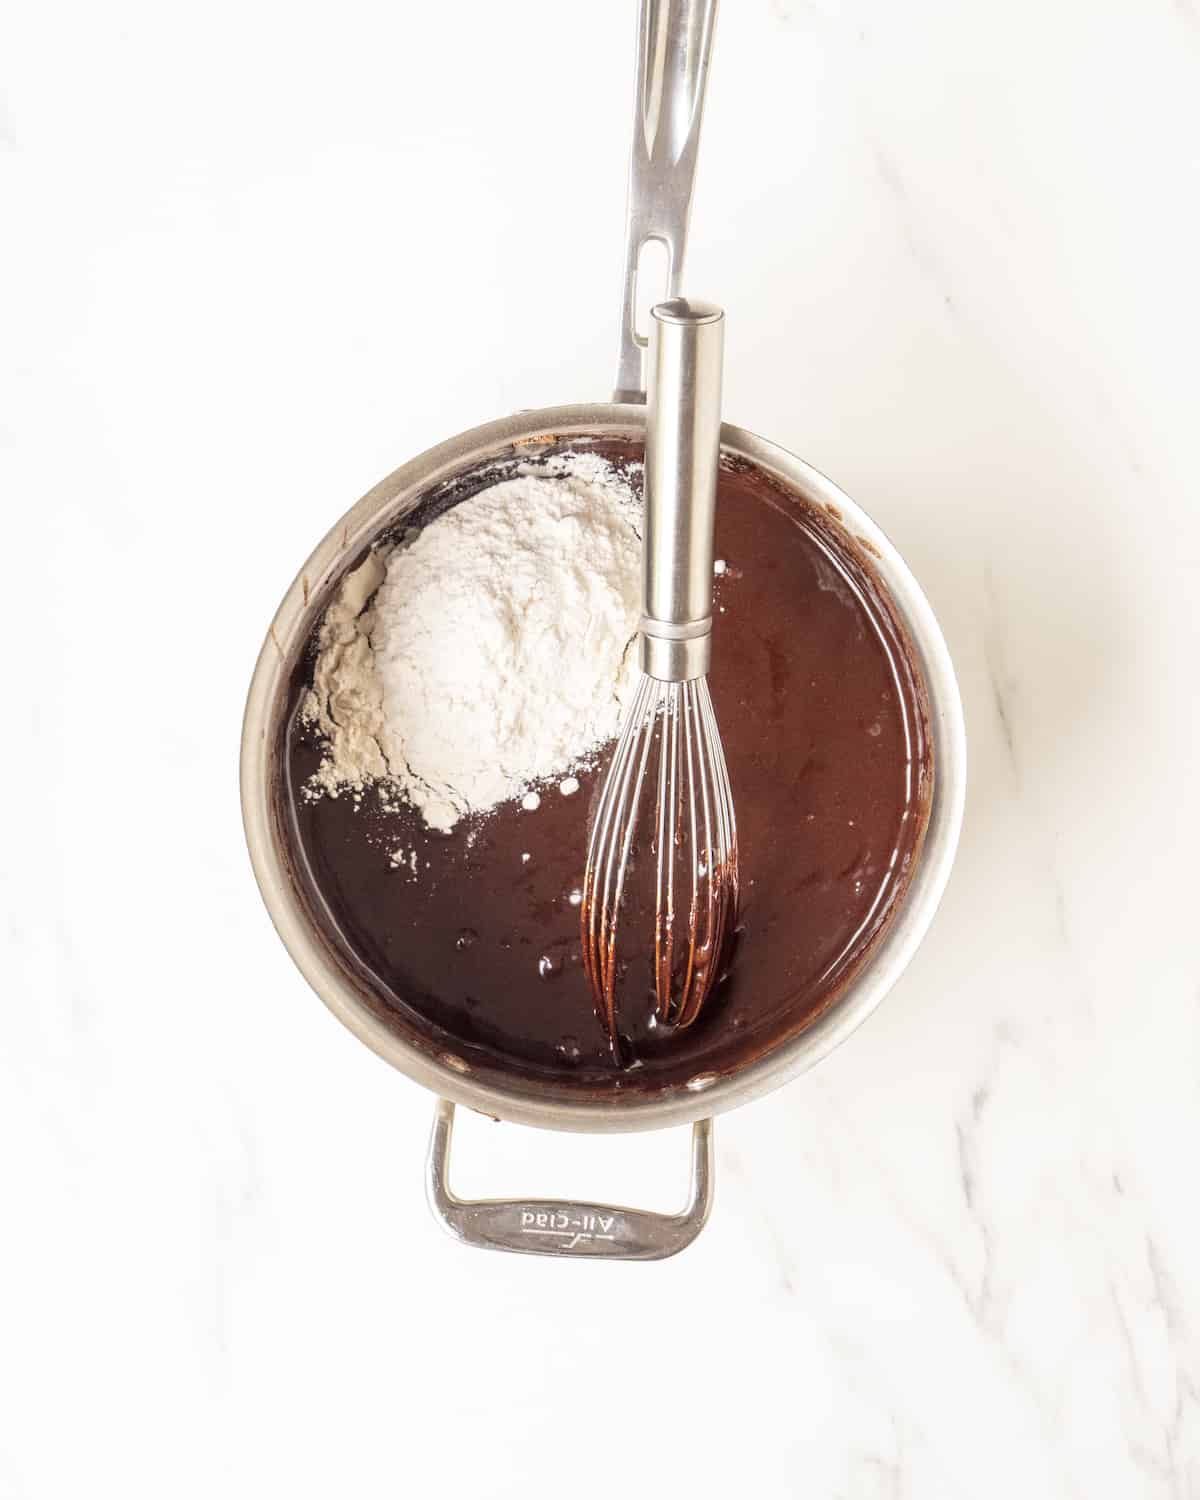 A pot filled with brownie batter, flour, and a whisk.  